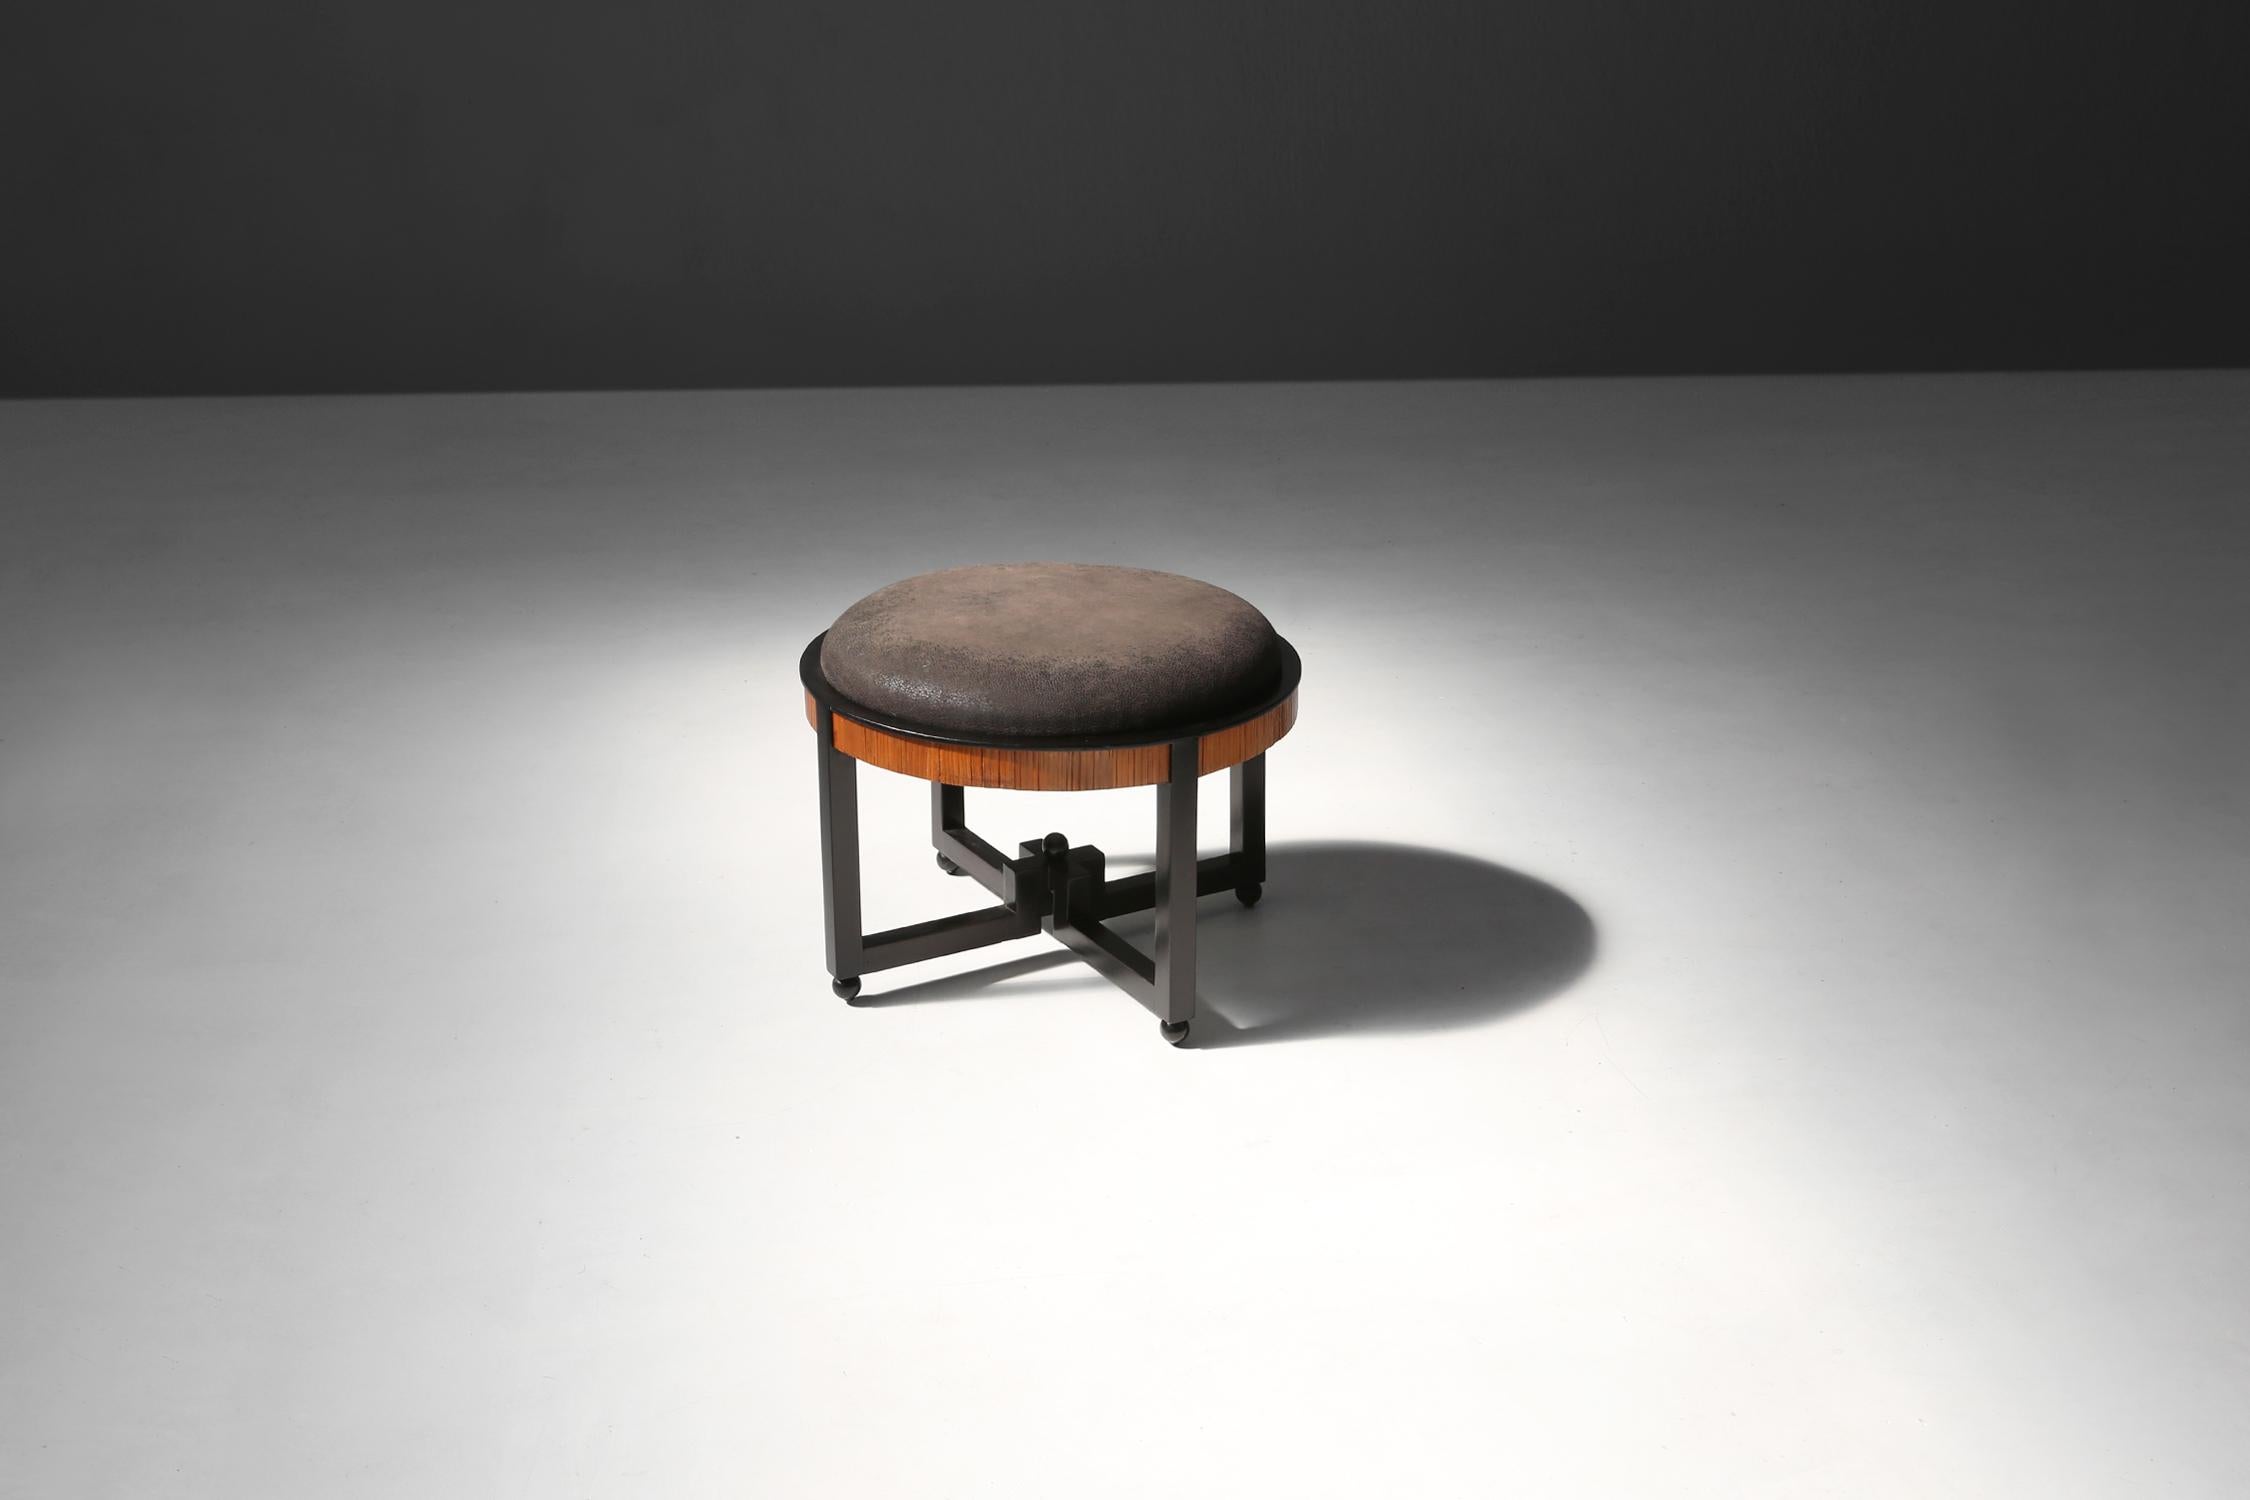 This 1920s footstool was designed in the spirit of Huib Hoste, a pioneer of Belgian avant-garde architecture and furniture art. He was one of the founders of the avant-garde movement in Belgium.

The base of the footstool is made of wood and